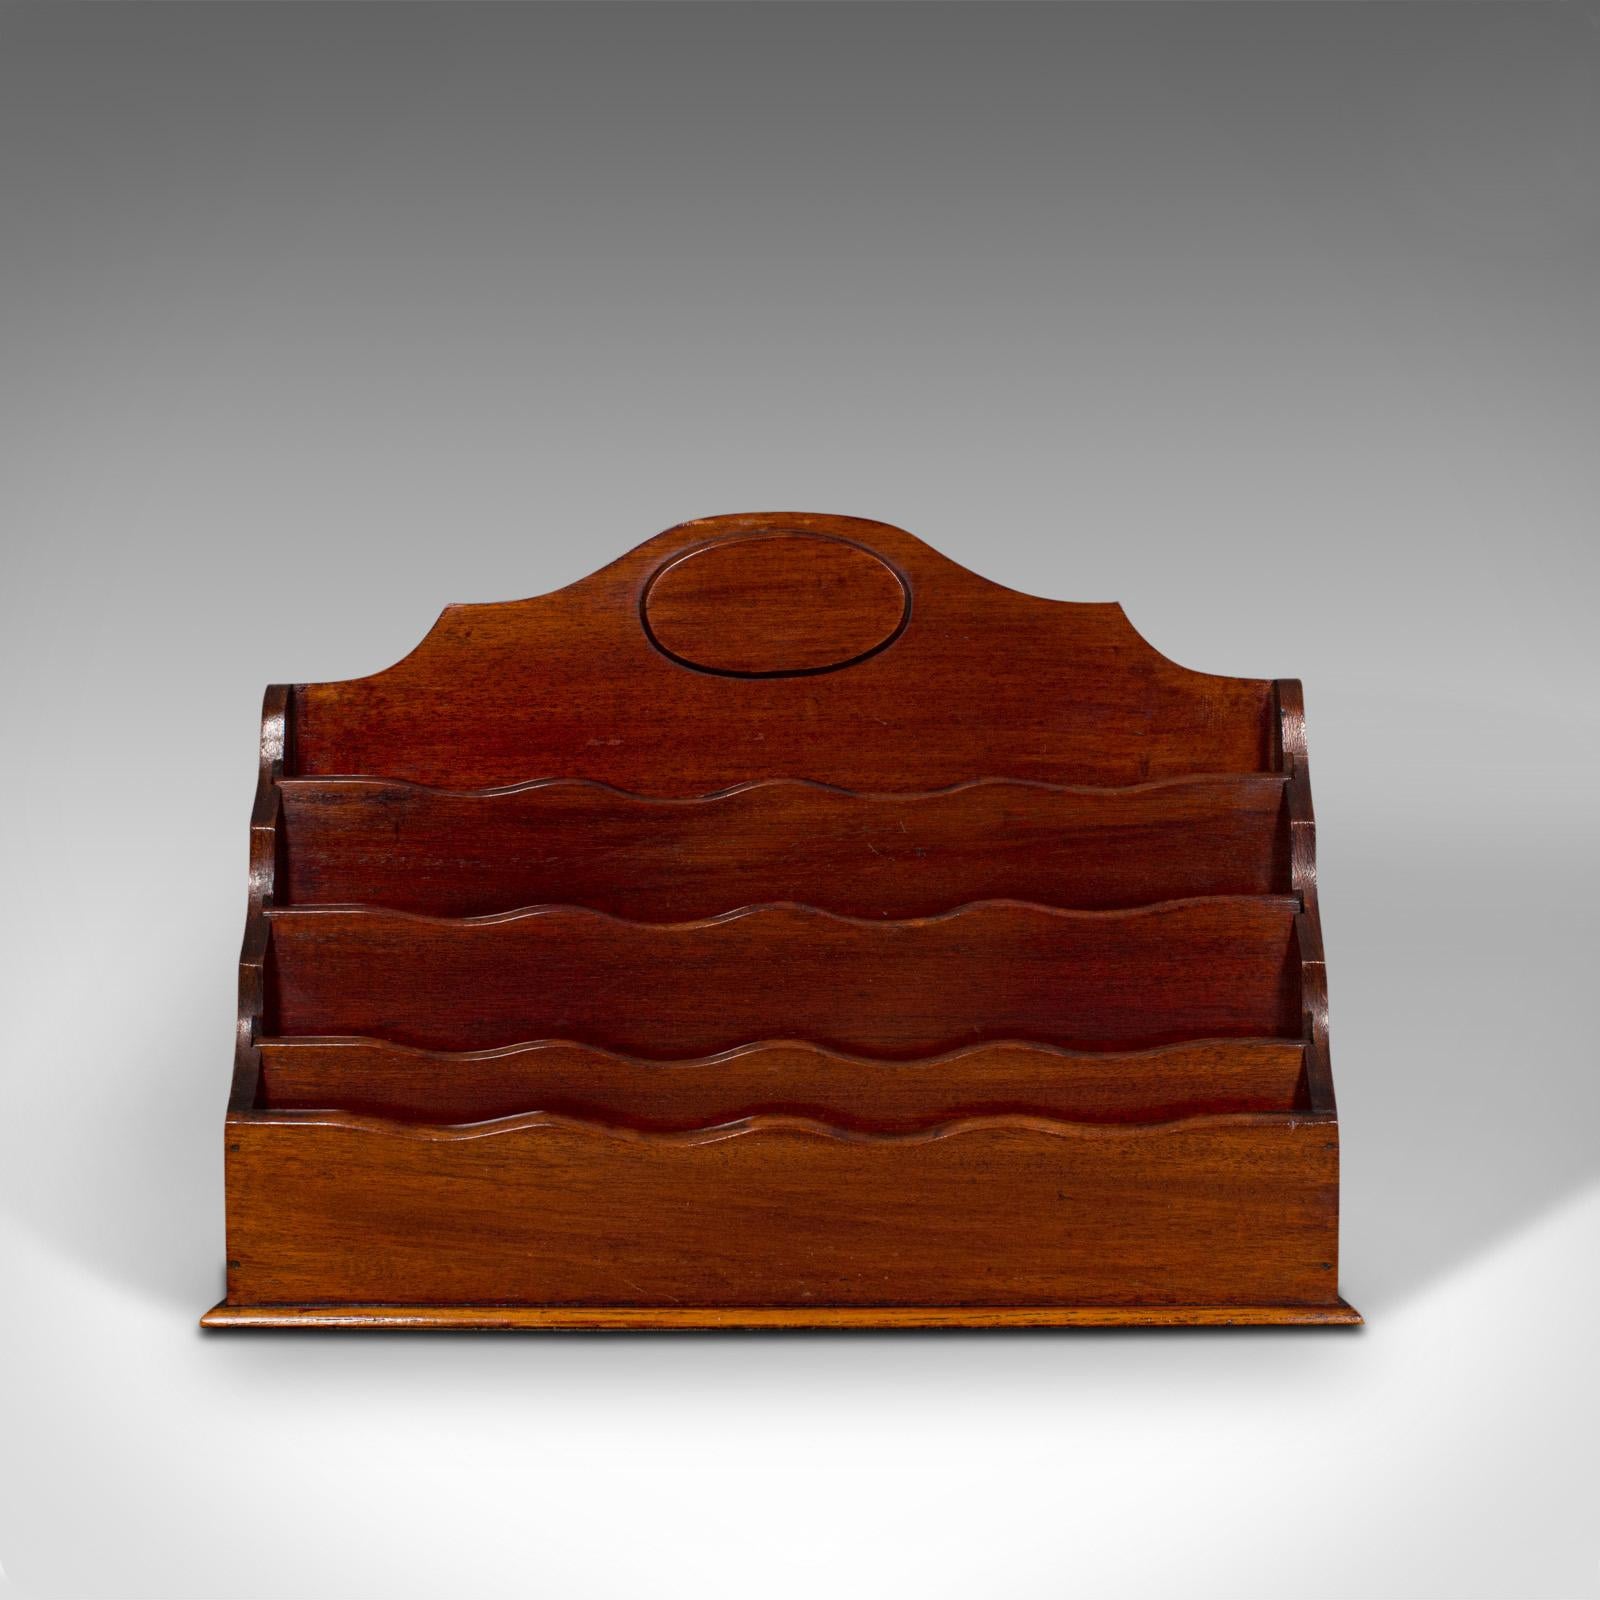 This is an antique desk tidy. An English, mahogany letter or stationery rack, dating to the Edwardian period, circa 1910.

Attractive wavy form draws the eye
Displaying a desirable aged patina
Select mahogany shows fine grain interest
Rich